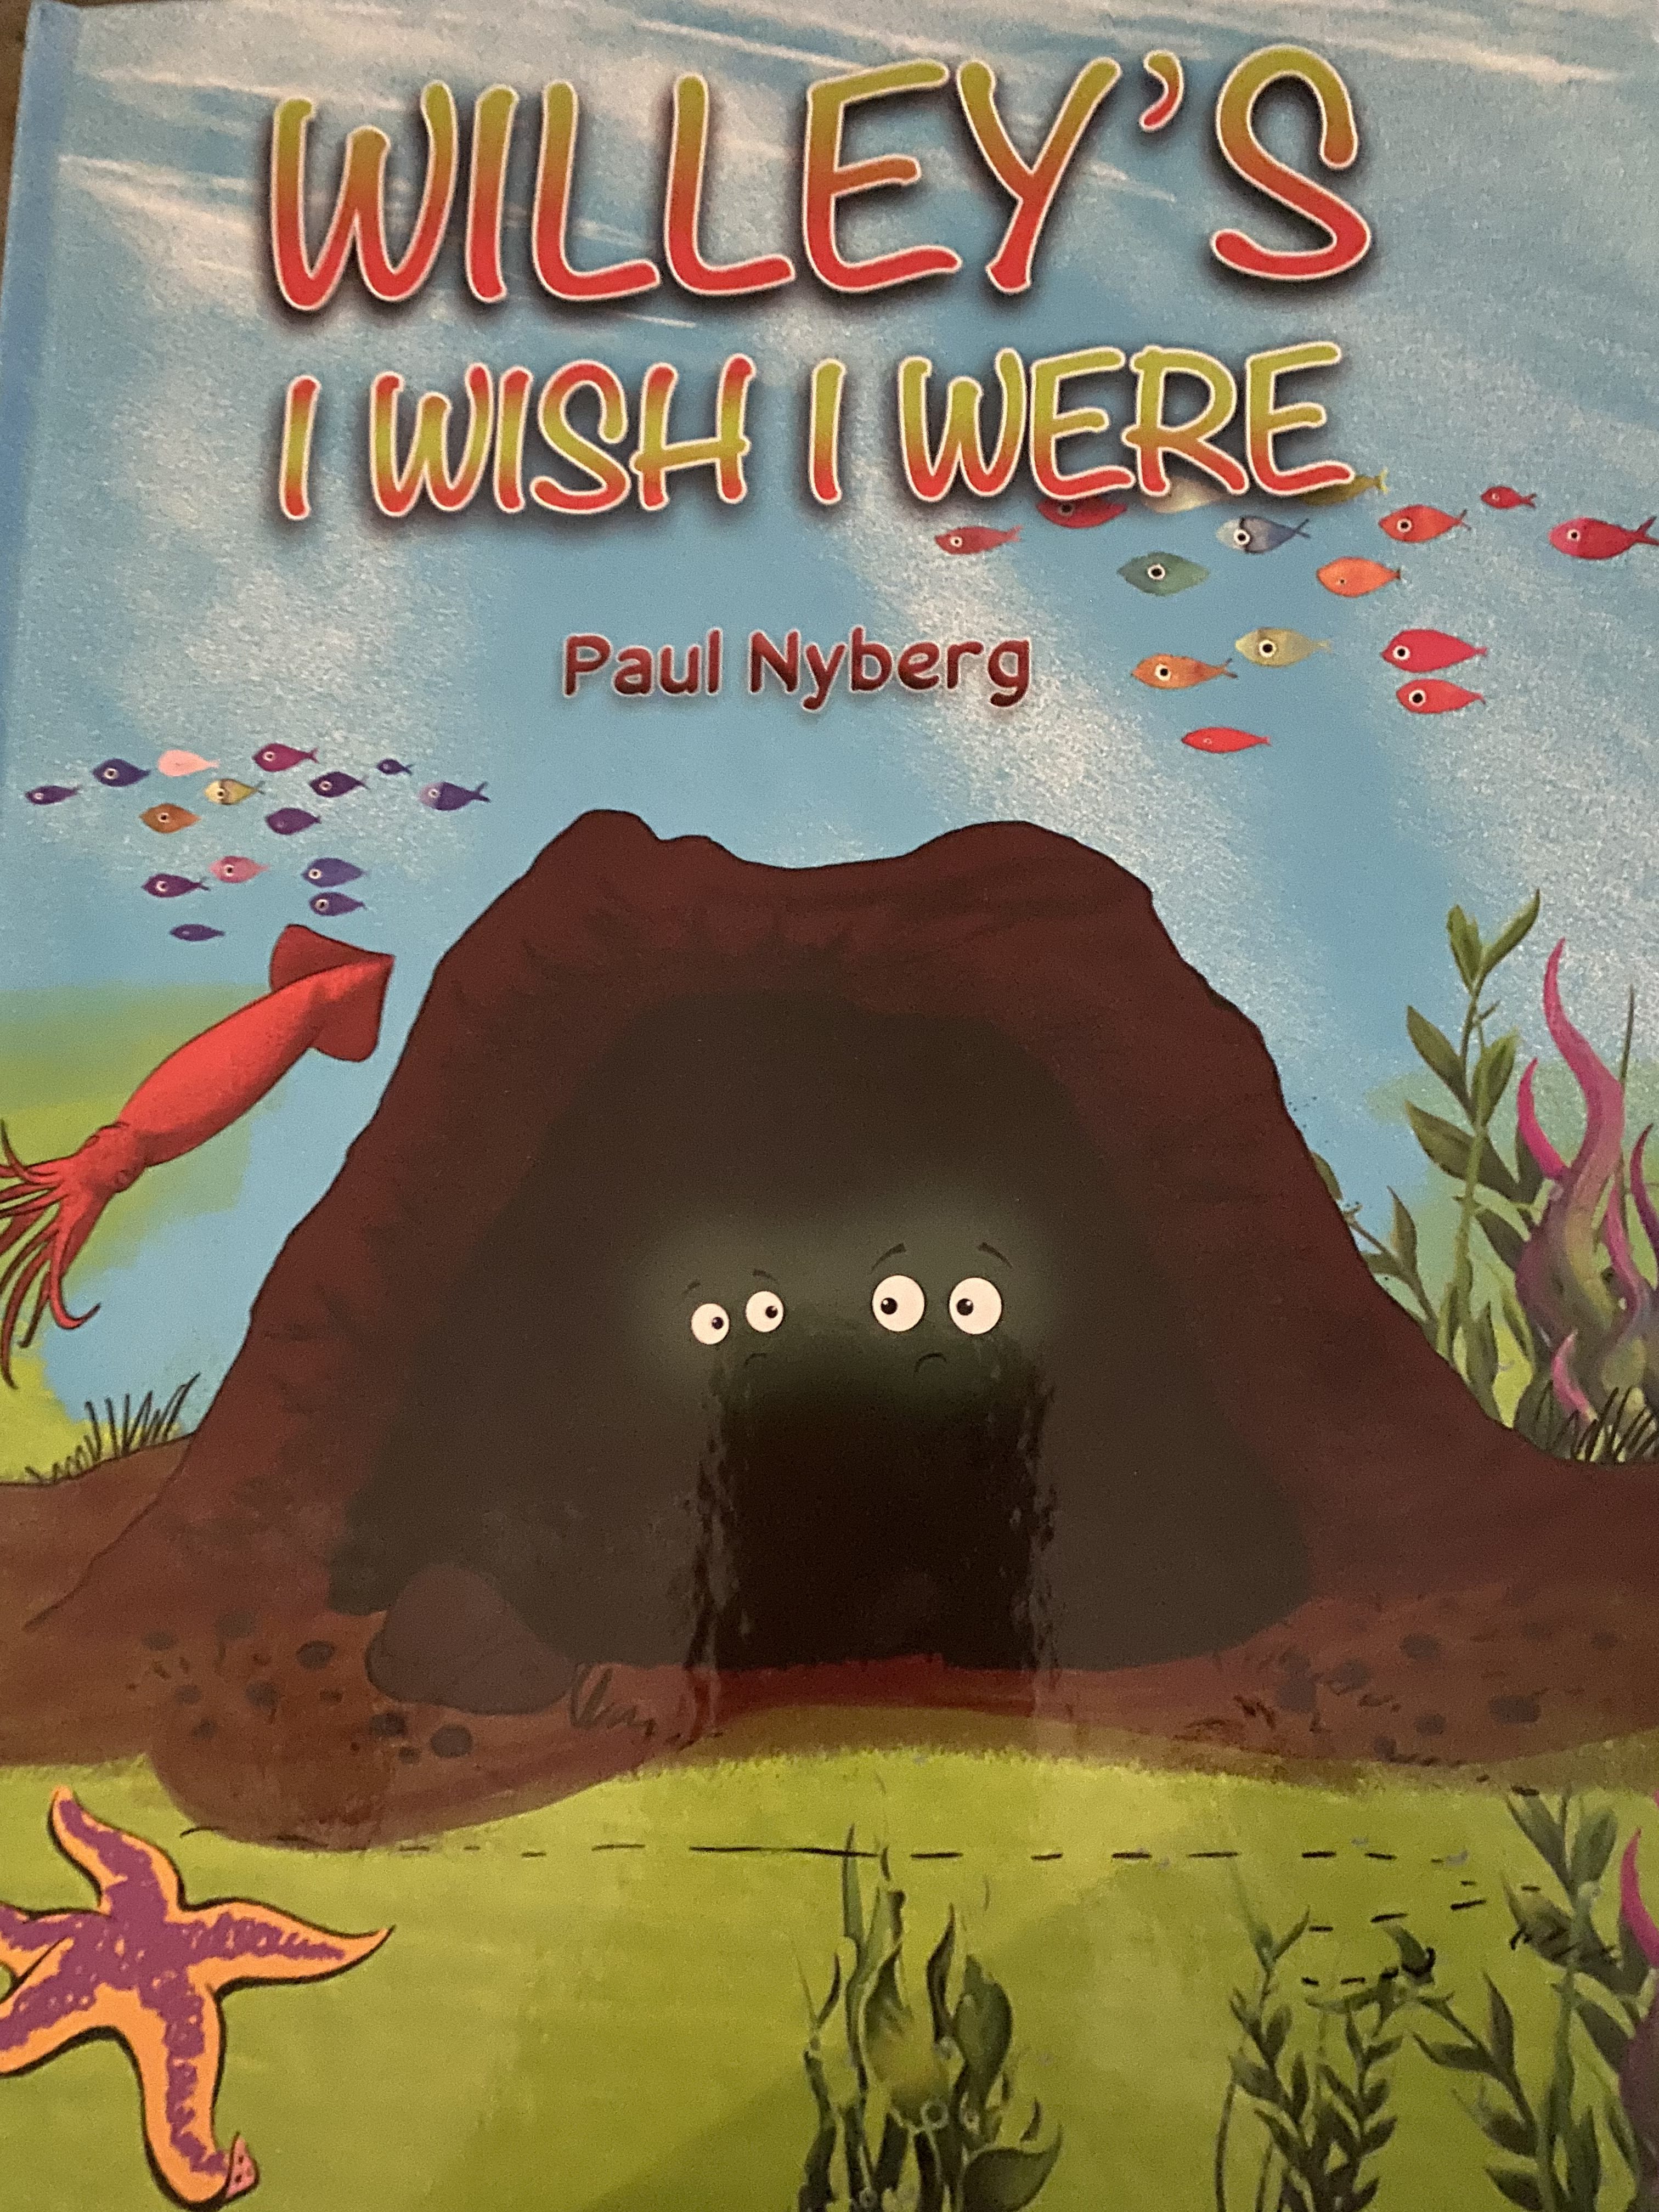 Marinette Moose Lodge is Hosting a Book Signing with Author Paul Nyberg on 12-2-23 – Open to the Public